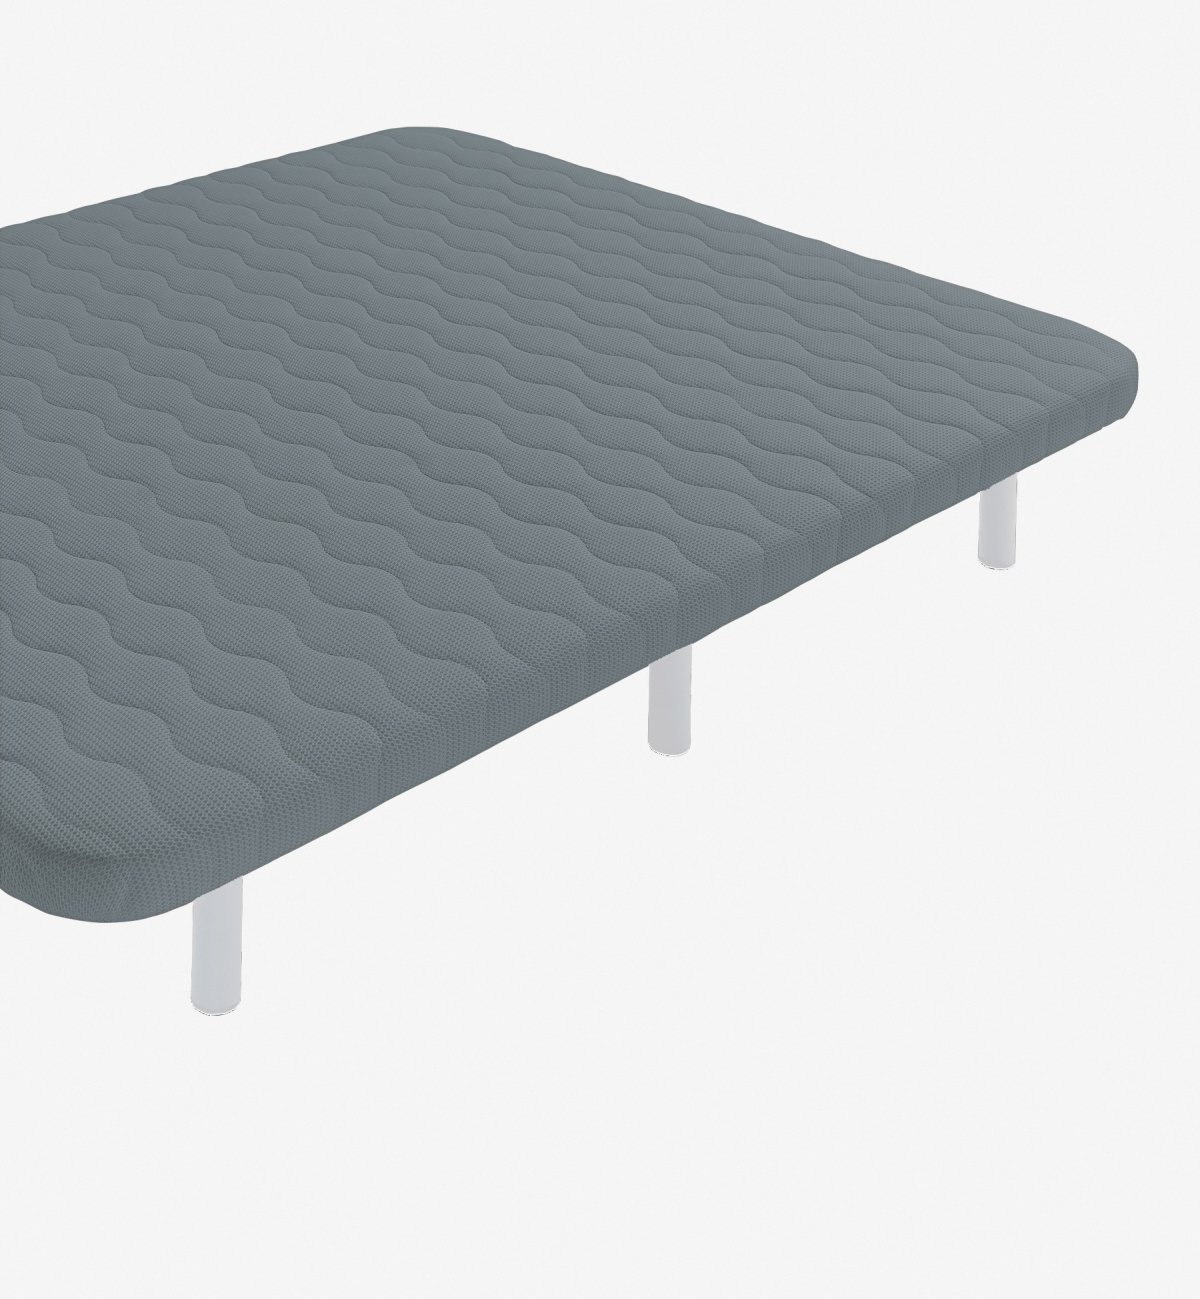 Single person bed base made of steel and breathable 3D Kadolis fabric